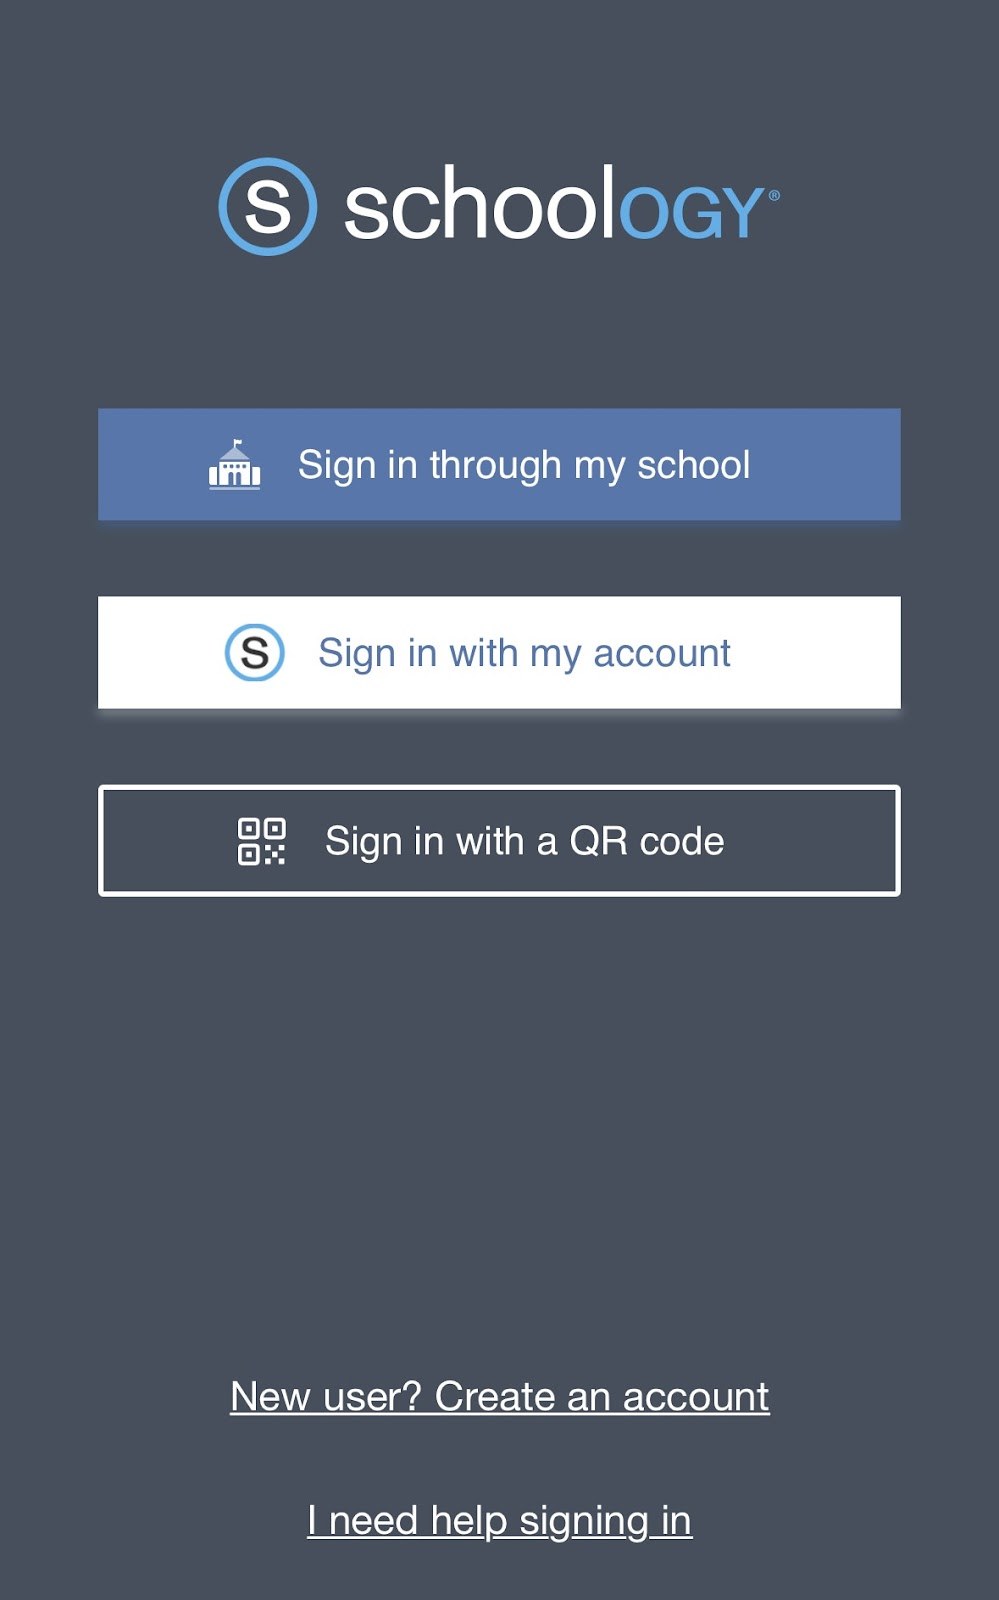 Click the blue “Sign in through my school” button.